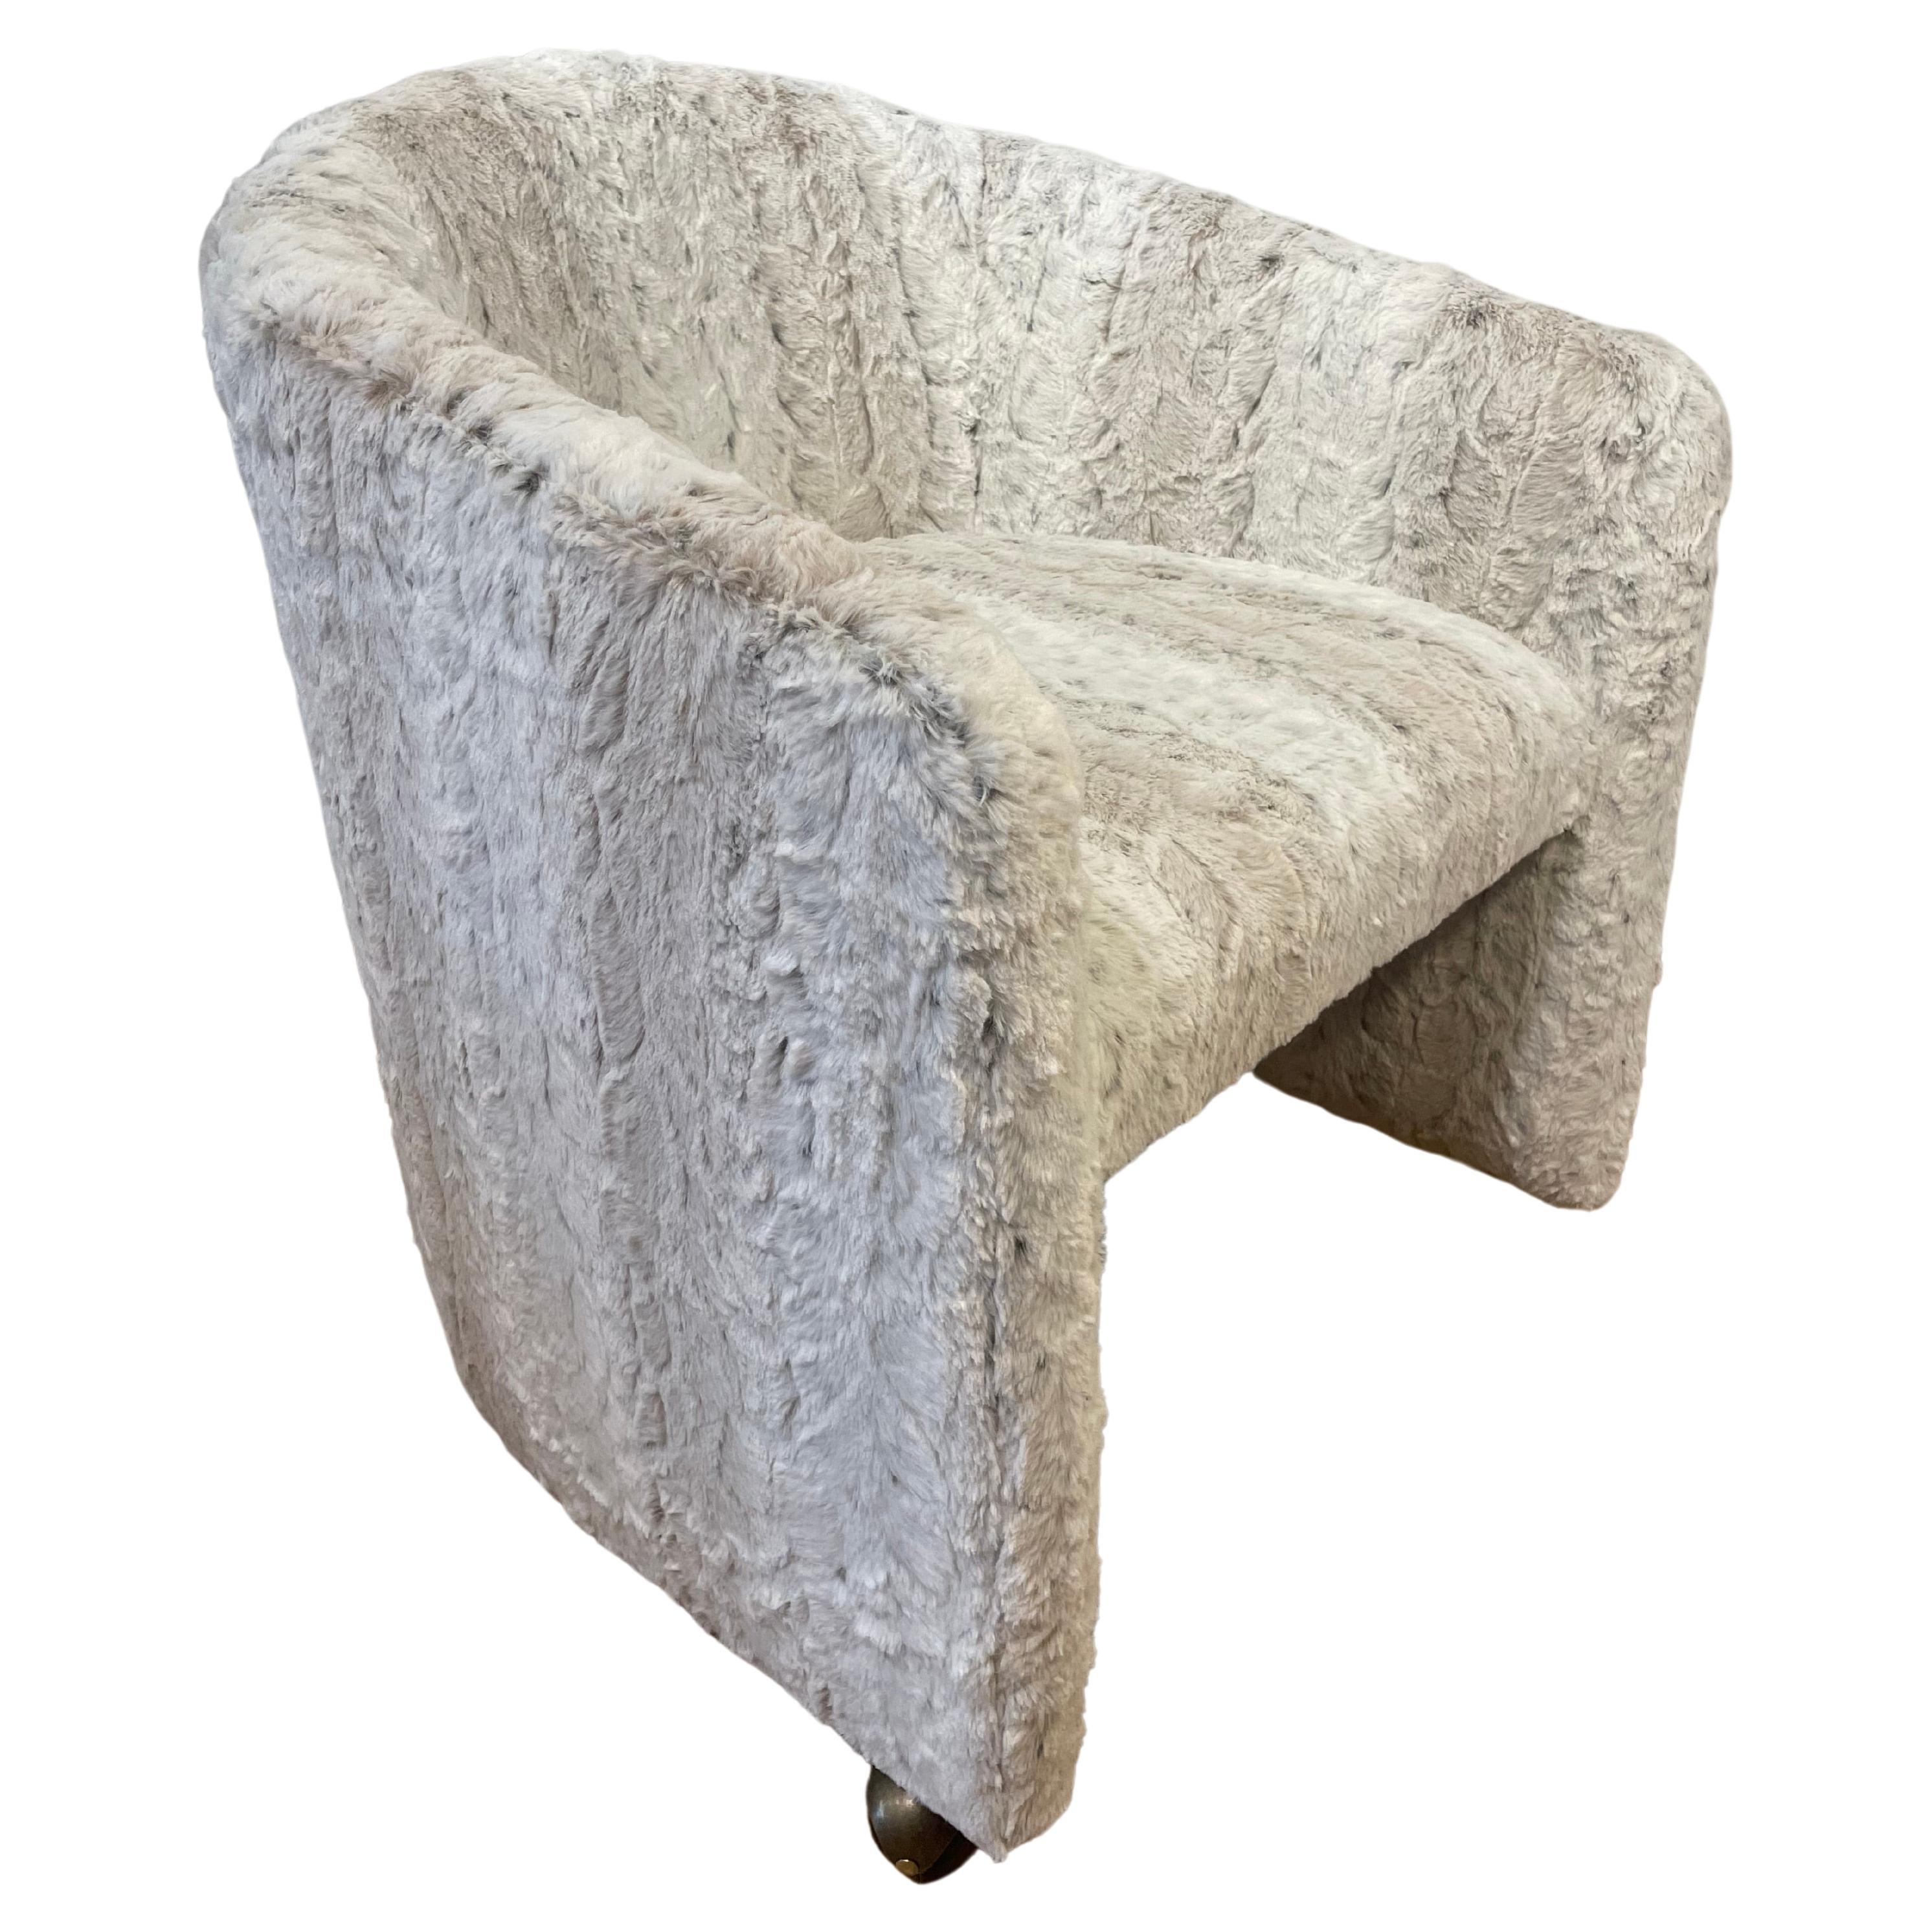 Other Faux Arctic Fur Barrel Chairs 'Pair'